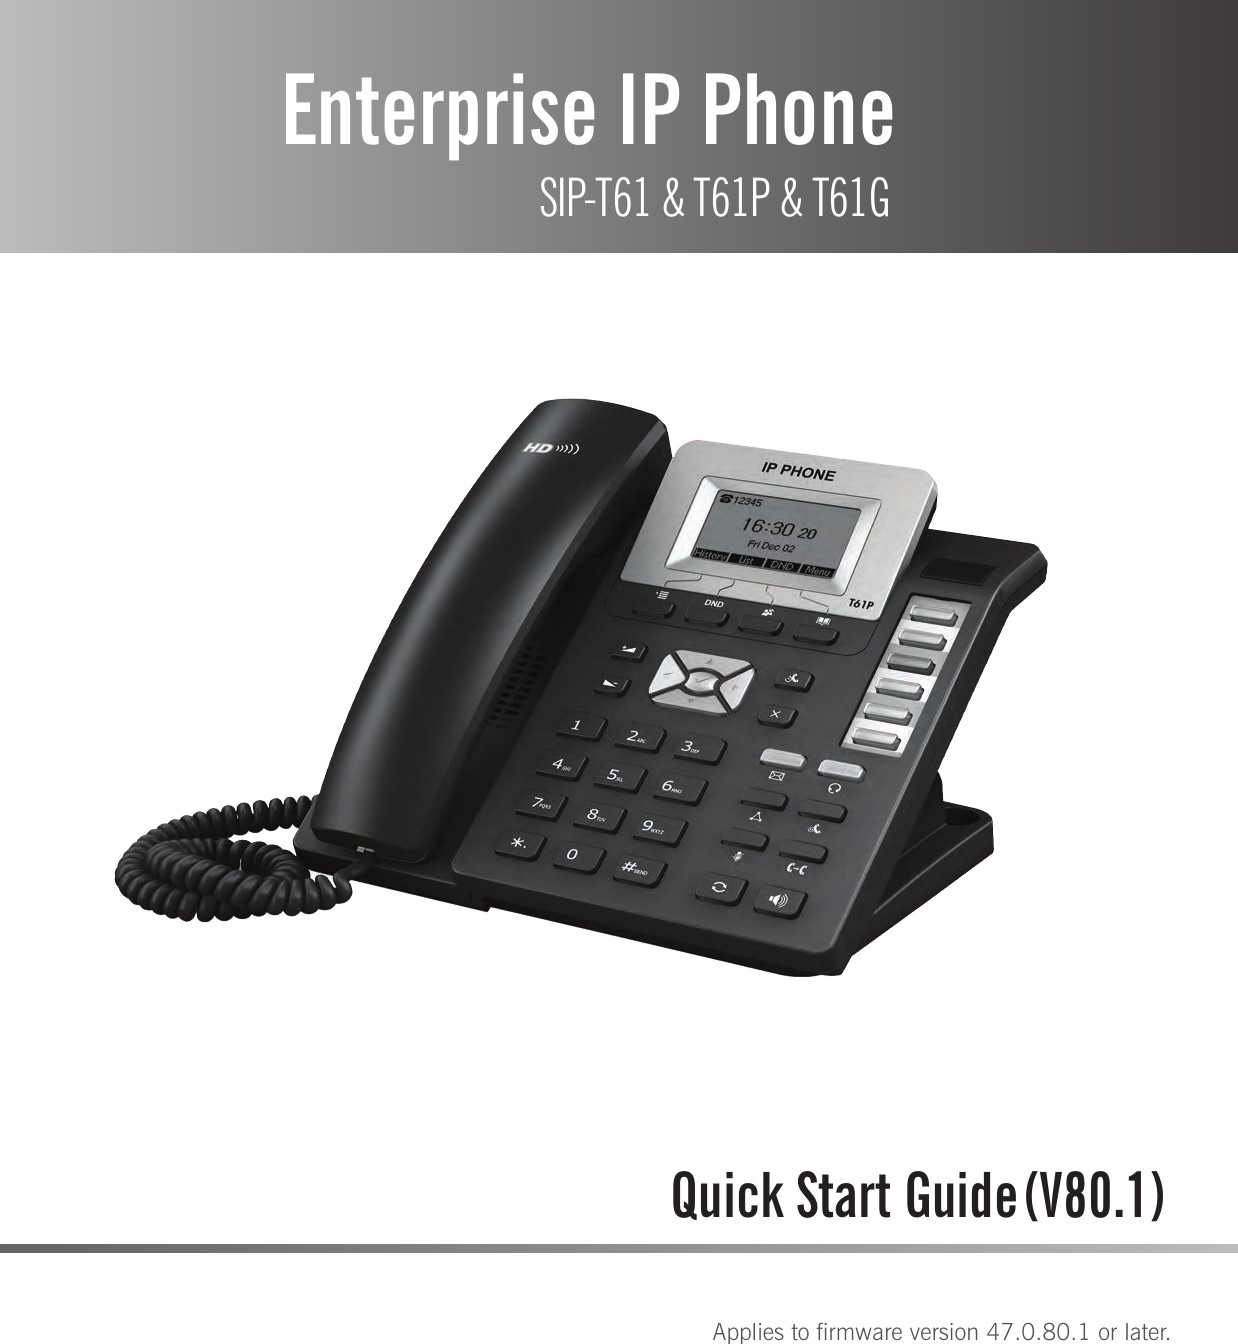 Enterprise IP Phone SIP-T61 &amp; T61P &amp; T61GQuick Start GuideApplies to firmware version 47.0.80.1 or later.(V80.1)